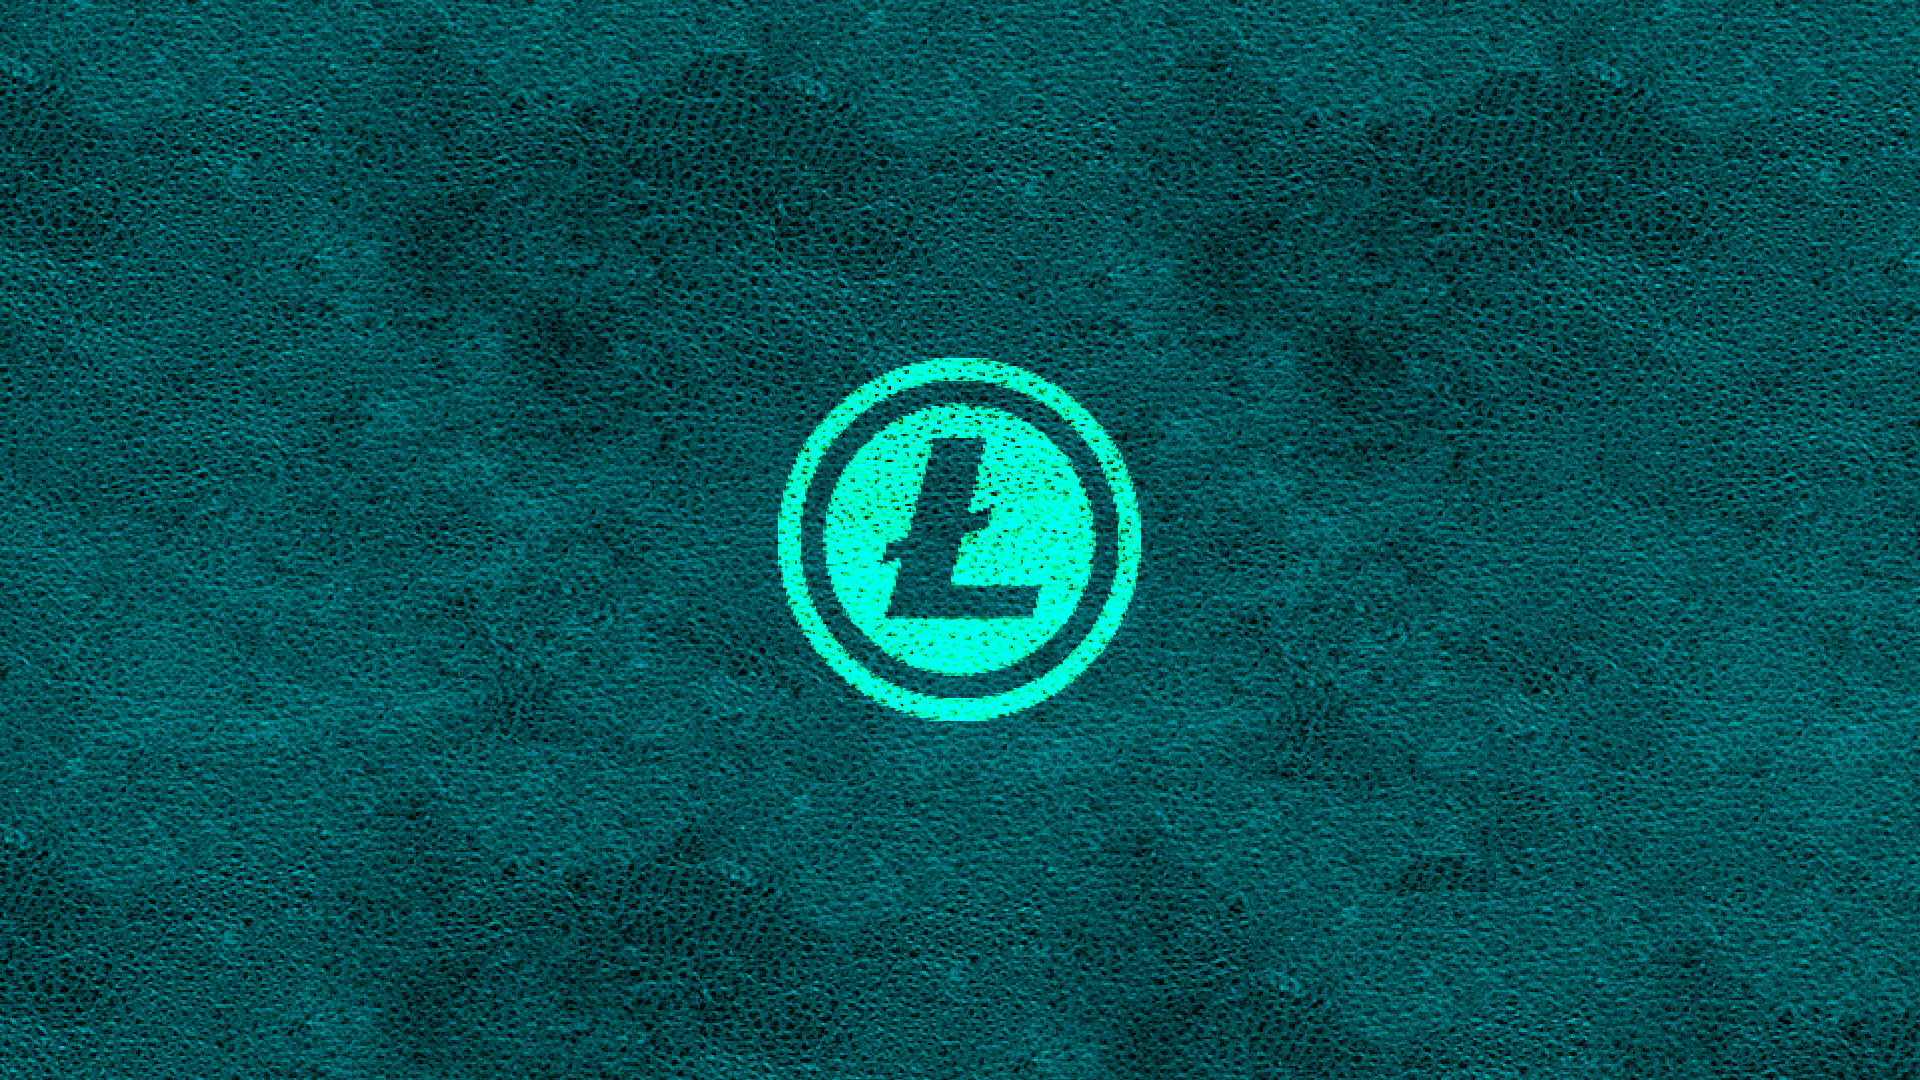 Litecoin Watch: Here’s What’s Happening with the Nuber 12 Cryptocurrency